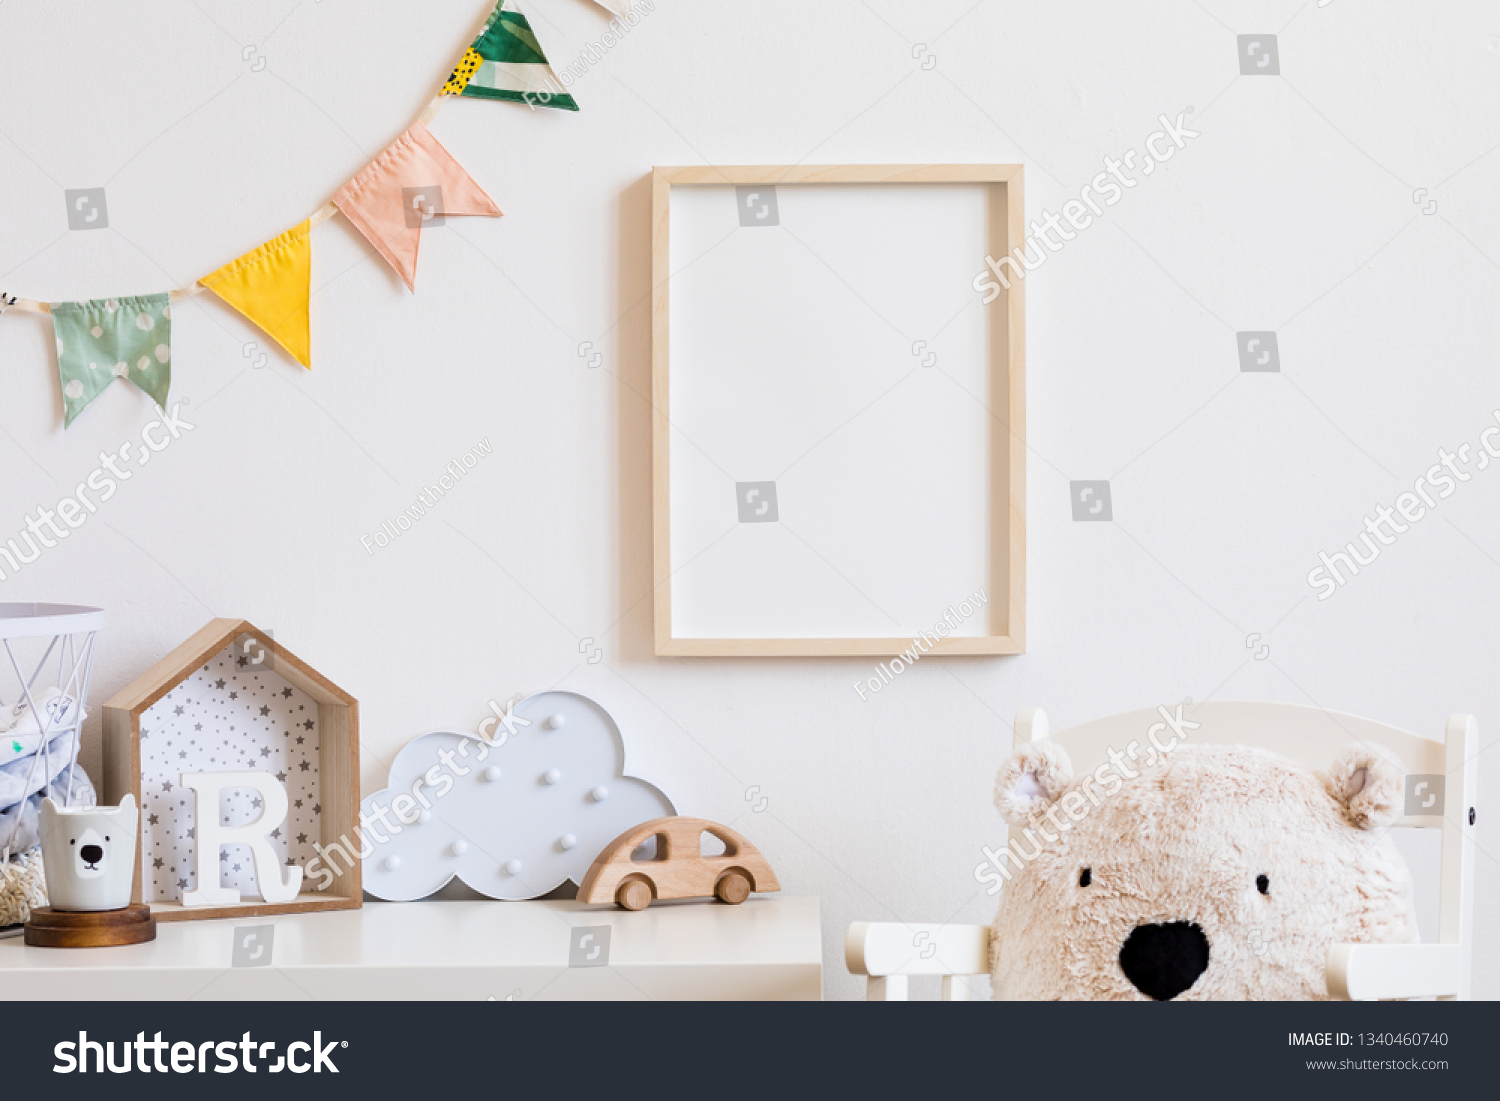 Stylish scandinavian child room with mock up photo poster frame on the white wall. Cute modern interior of nursery with boxes, teddy bear, toys.  wooden accessories and colorful flags. Real photo. #1340460740